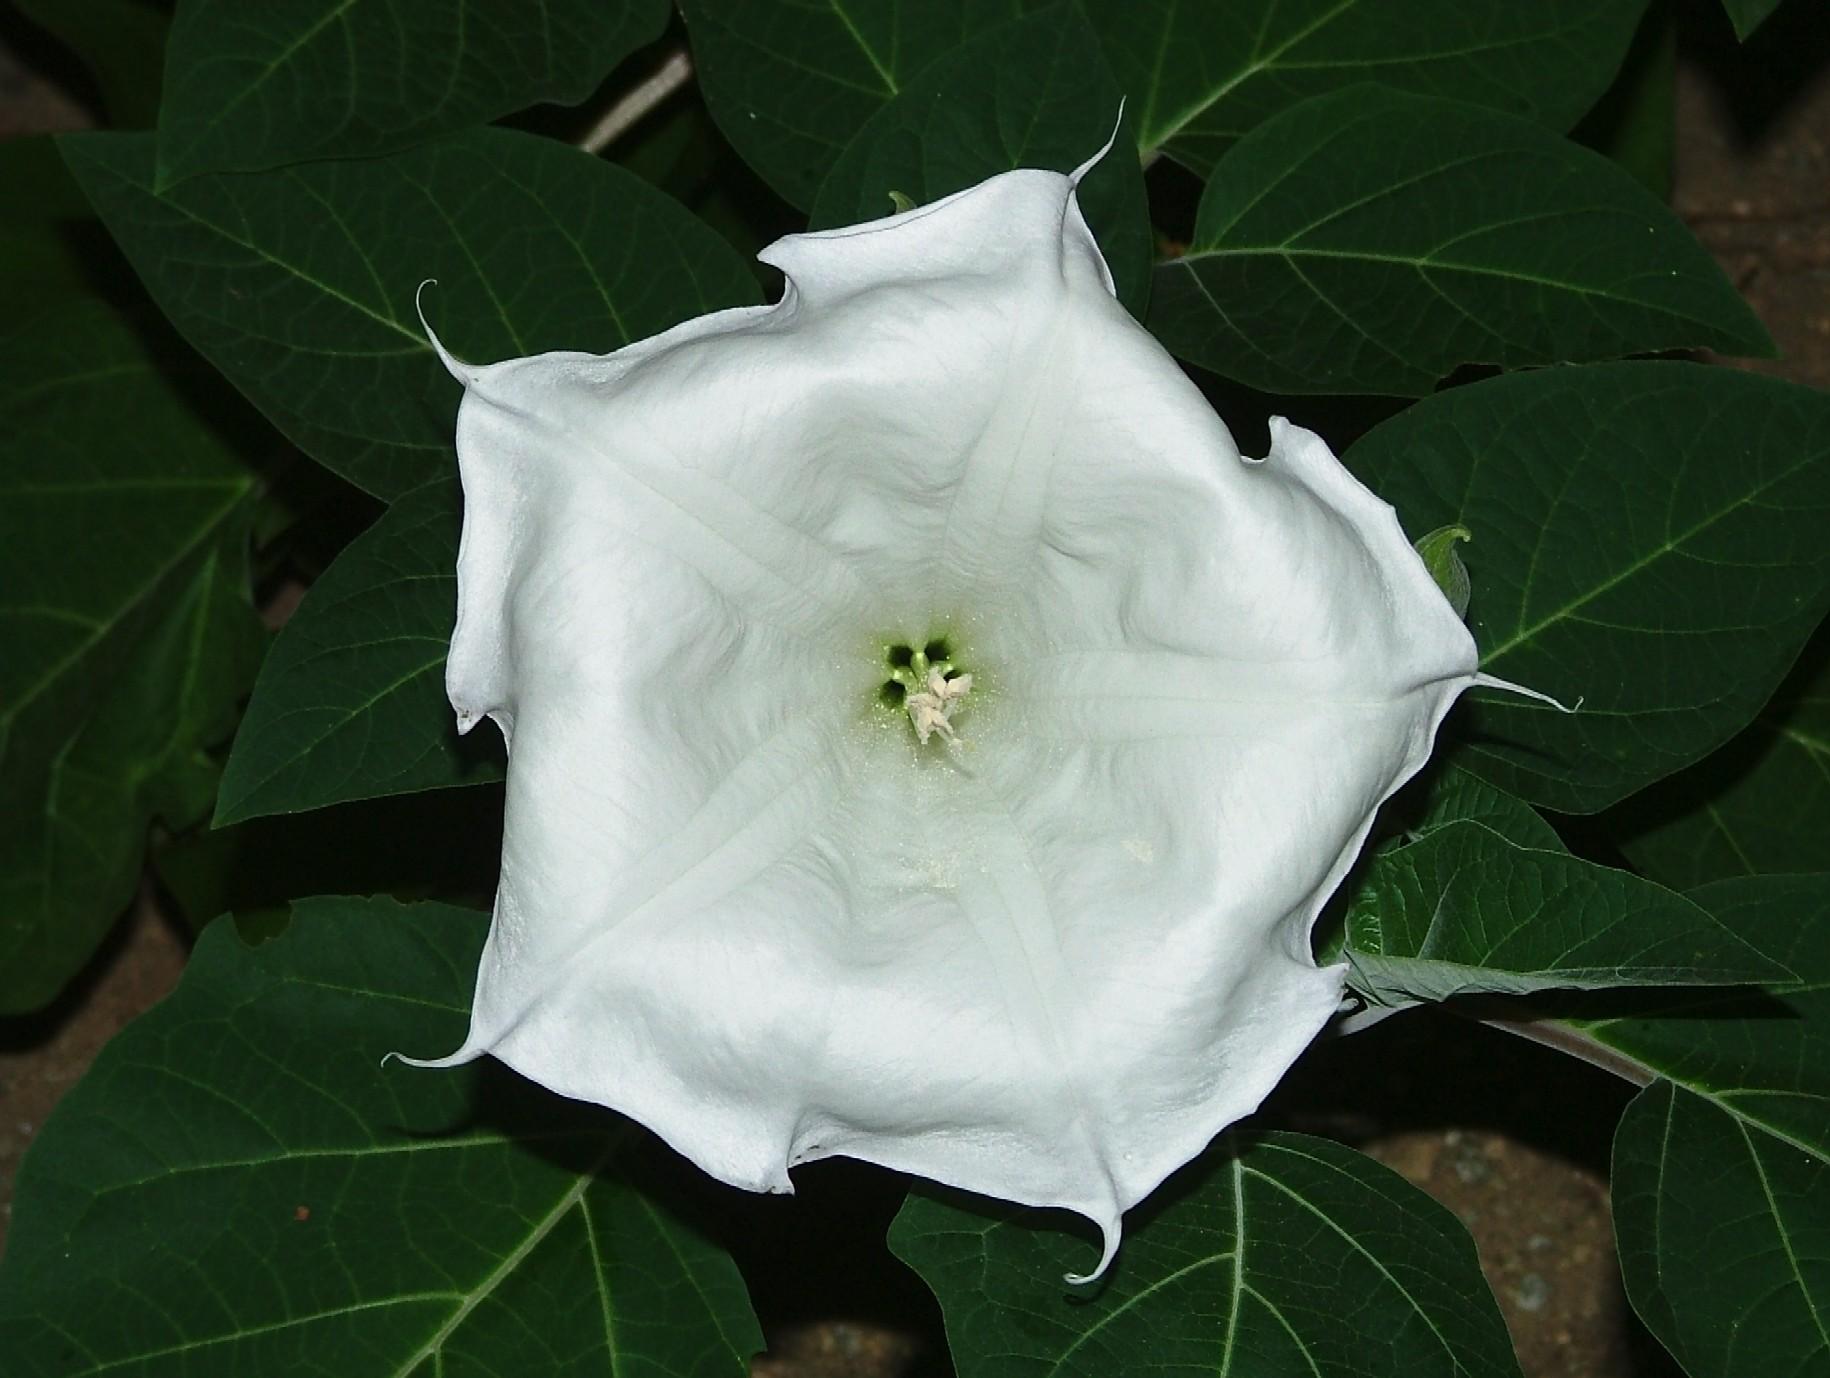 Moonflower (user submitted)